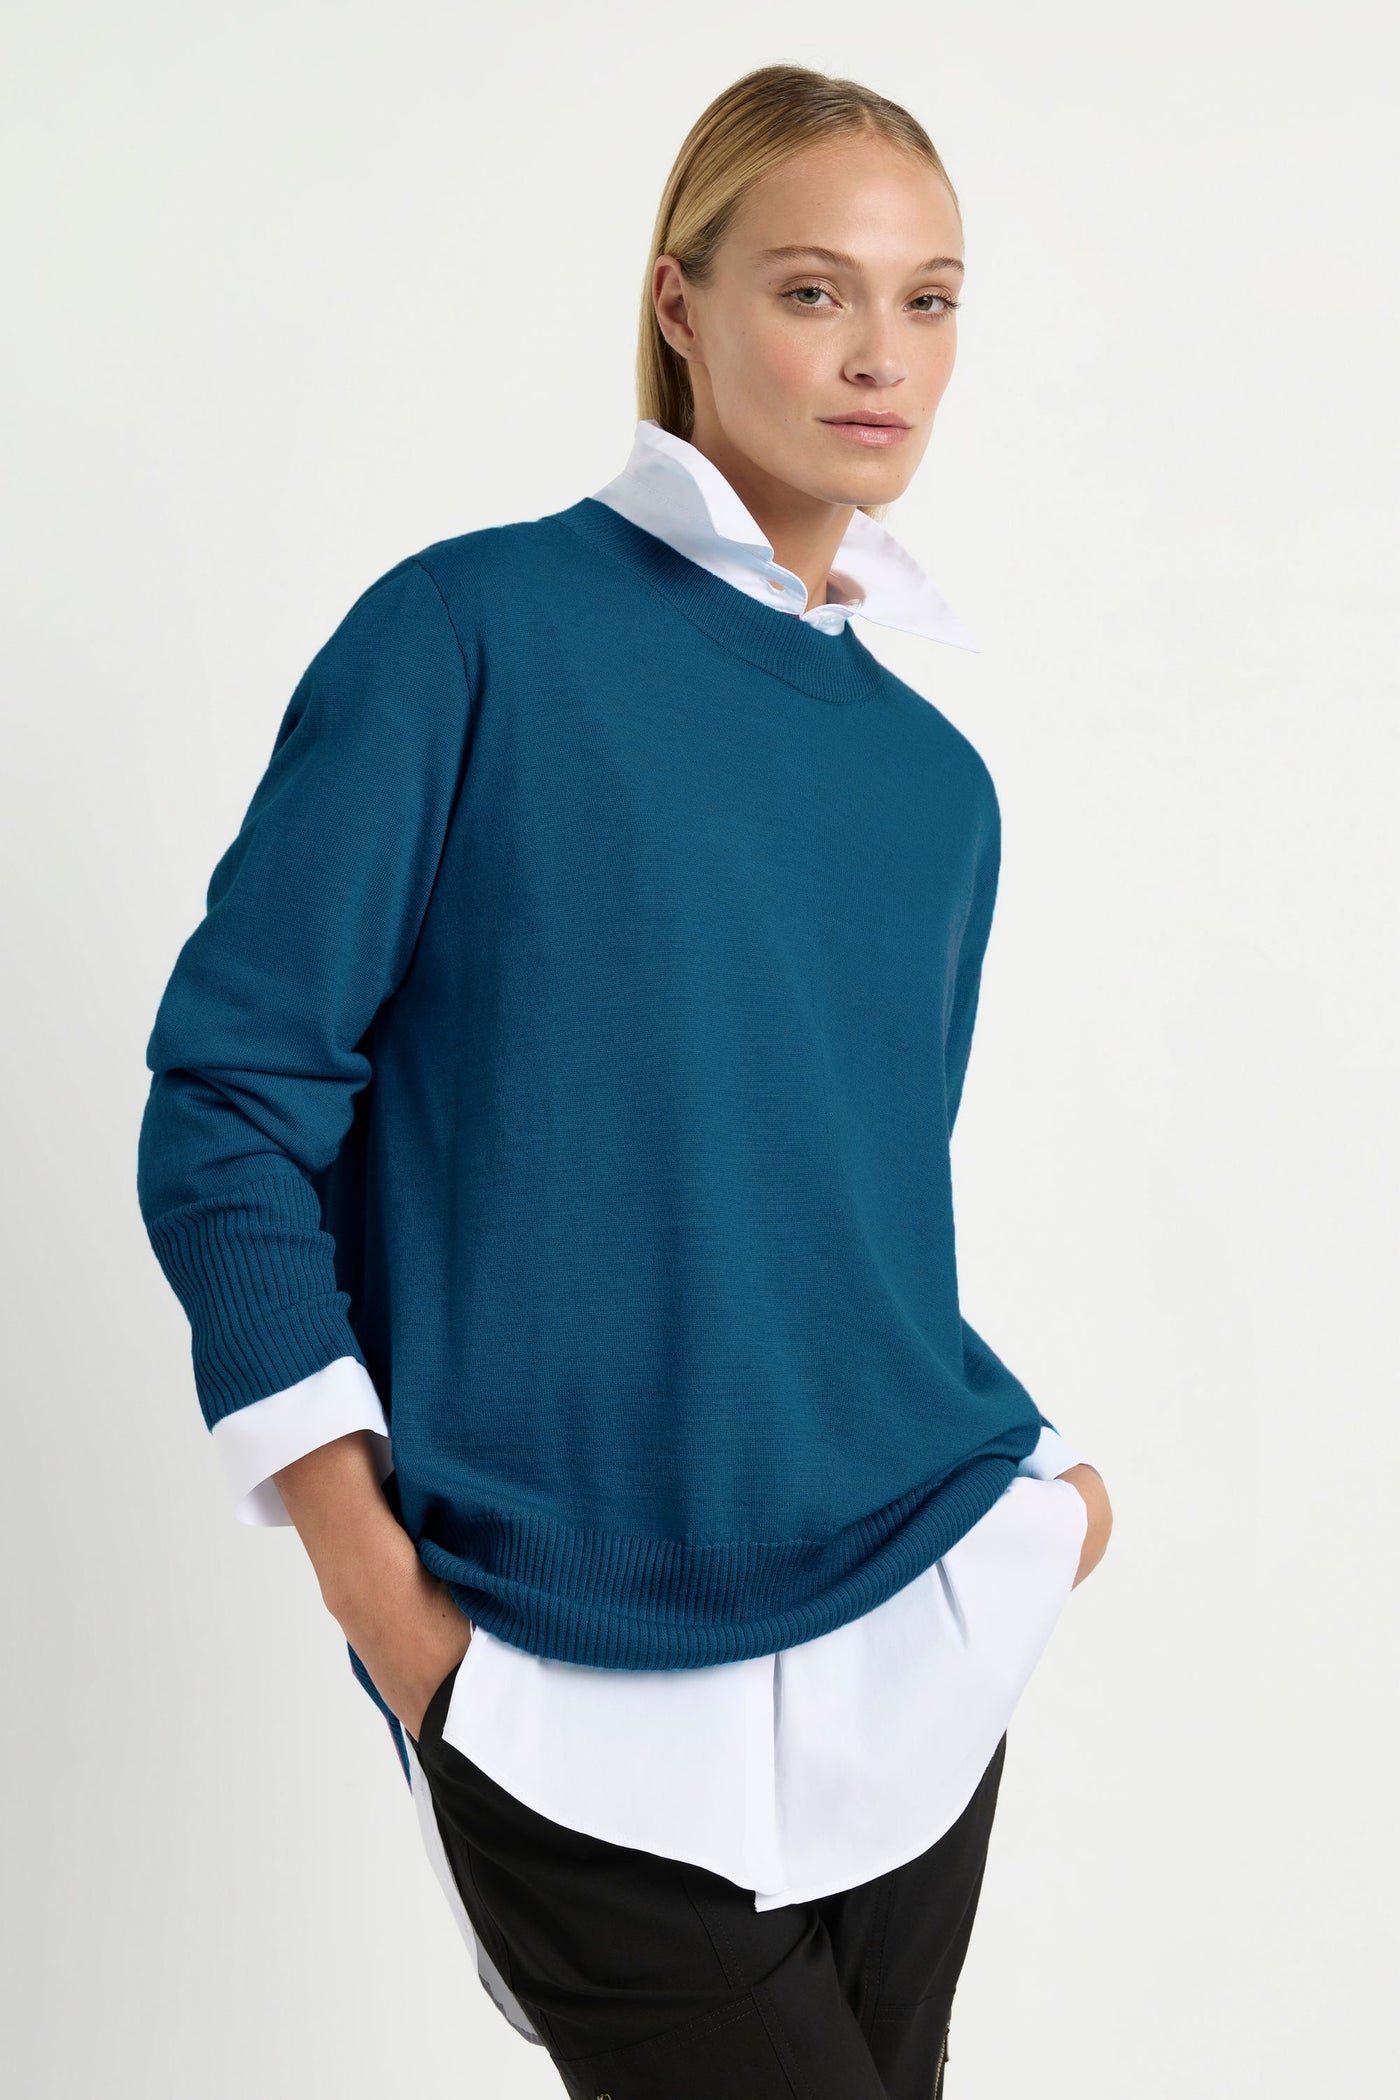 PACE SWEATER - F139290